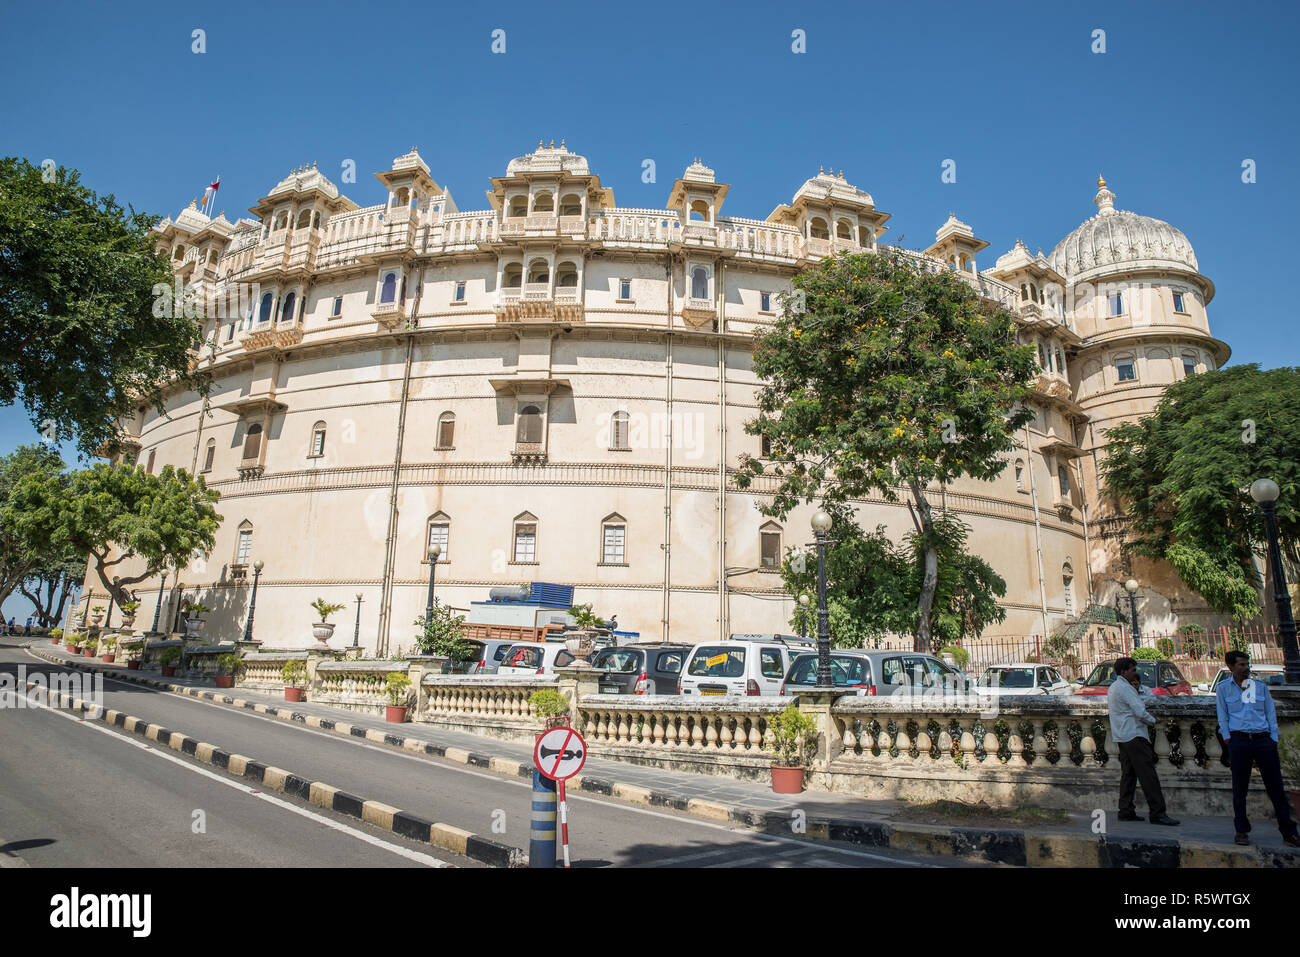 Outside view of City Palace building, Udaipur, Rajasthan, India Stock Photo